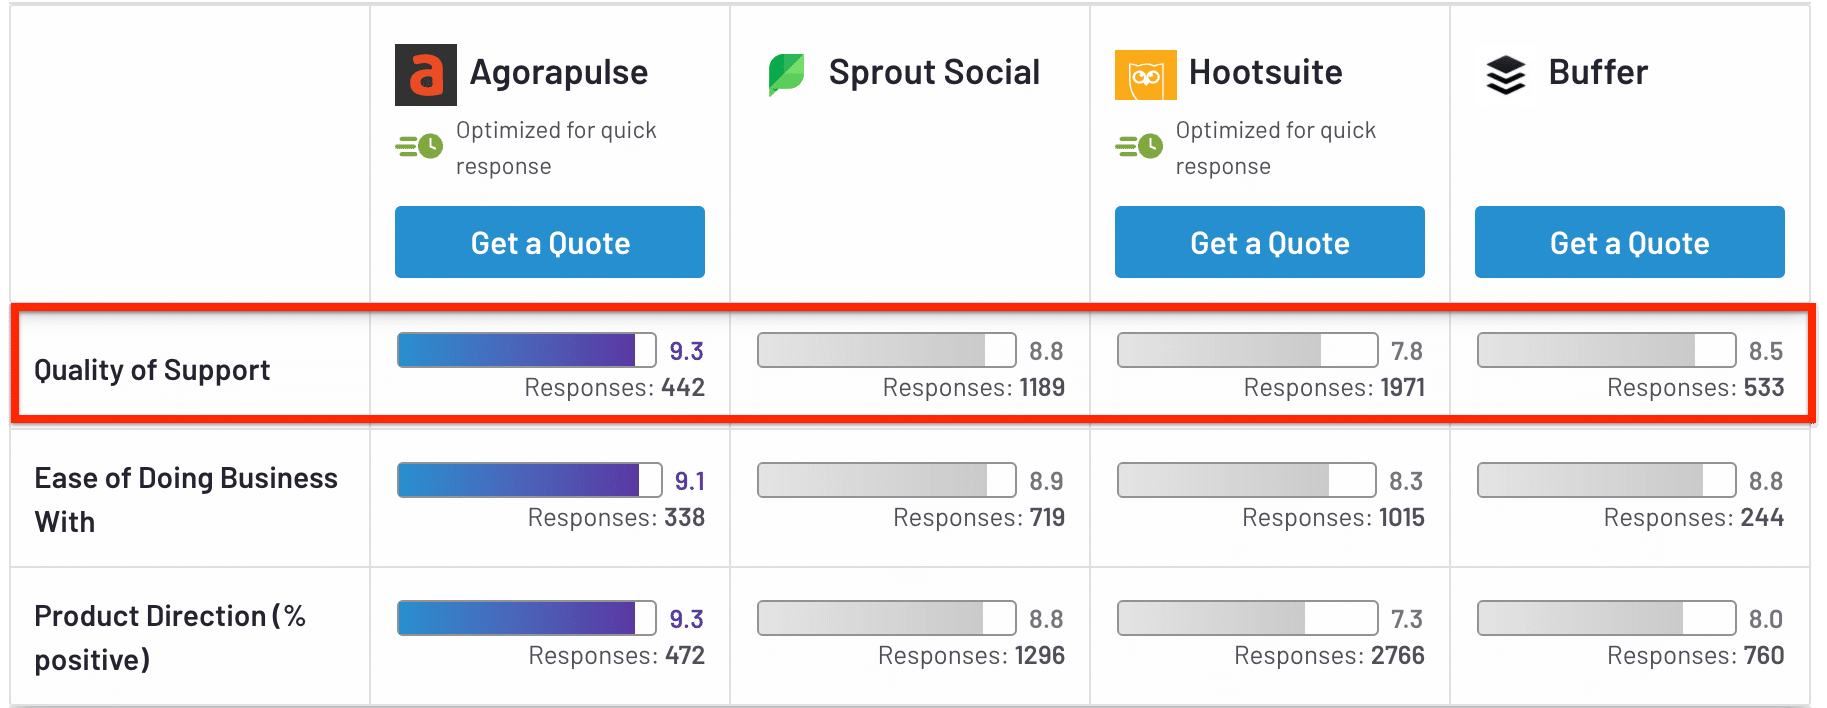 Hootsuite ranks the lowest in Quality of Support compared to Agorapulse and others.